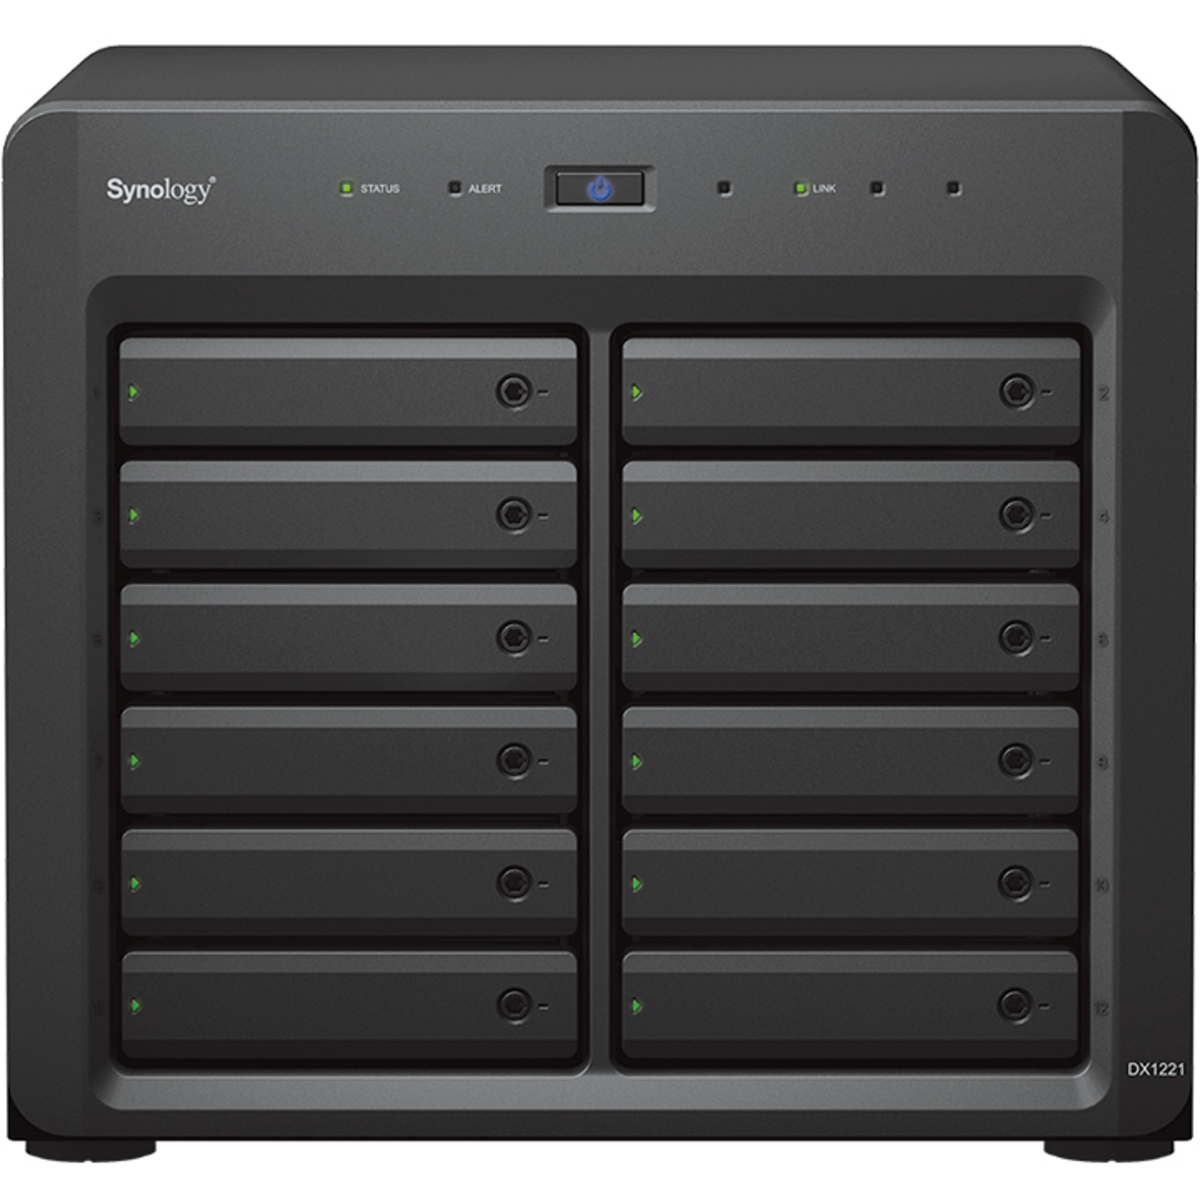 Synology DX1222 External Expansion Drive 176tb 12-Bay Desktop Multimedia / Power User / Business Expansion Enclosure 11x16tb Seagate IronWolf ST16000VN001 3.5 7200rpm SATA 6Gb/s HDD NAS Class Drives Installed - Burn-In Tested DX1222 External Expansion Drive